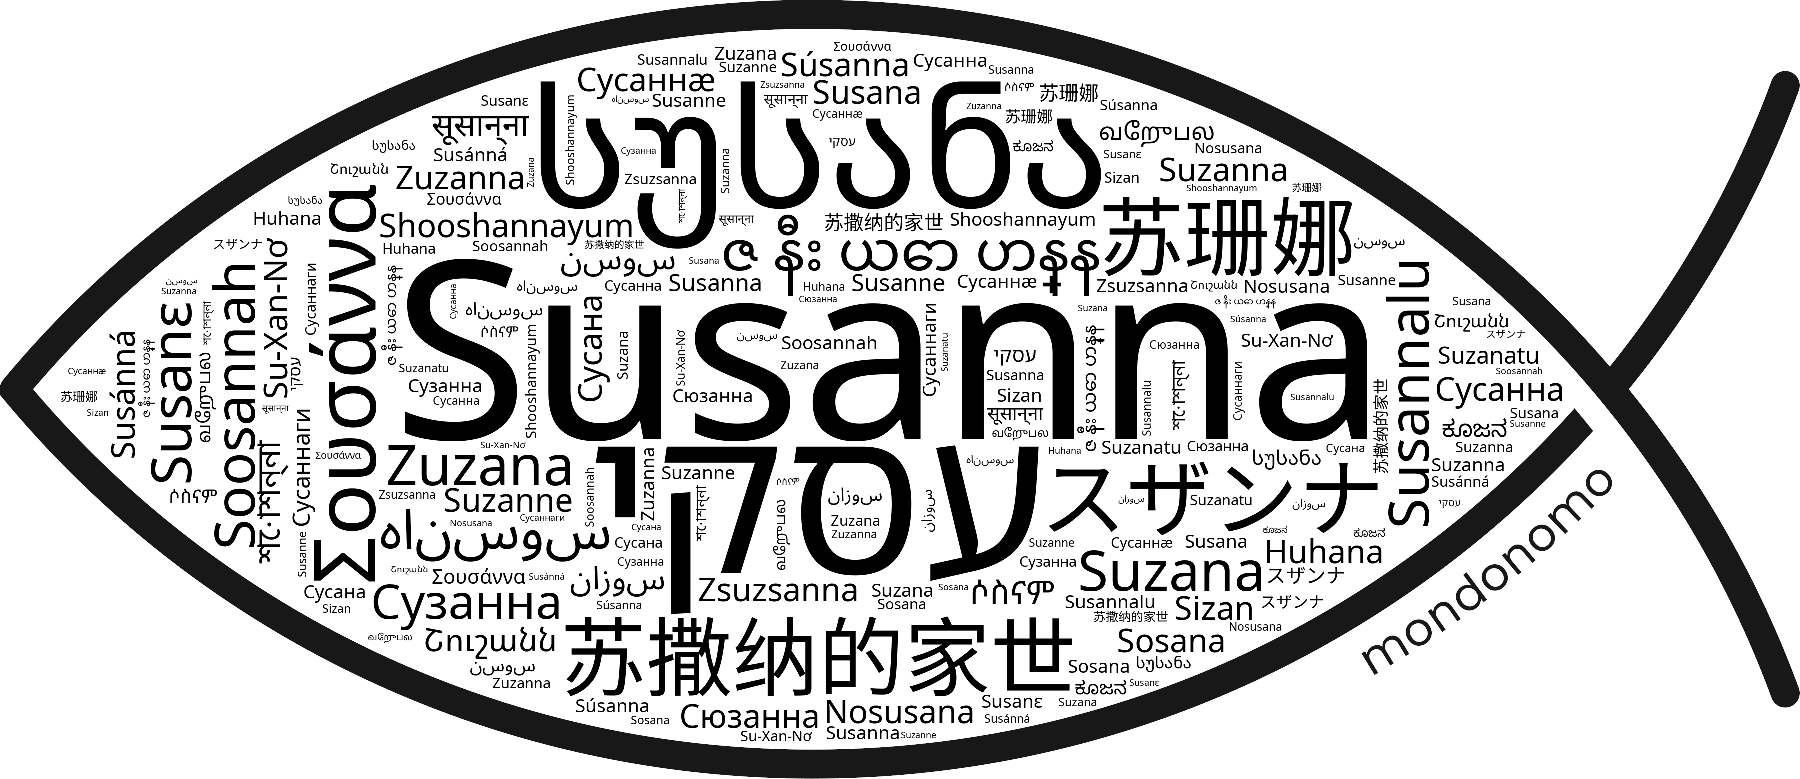 Name Susanna in the world's Bibles